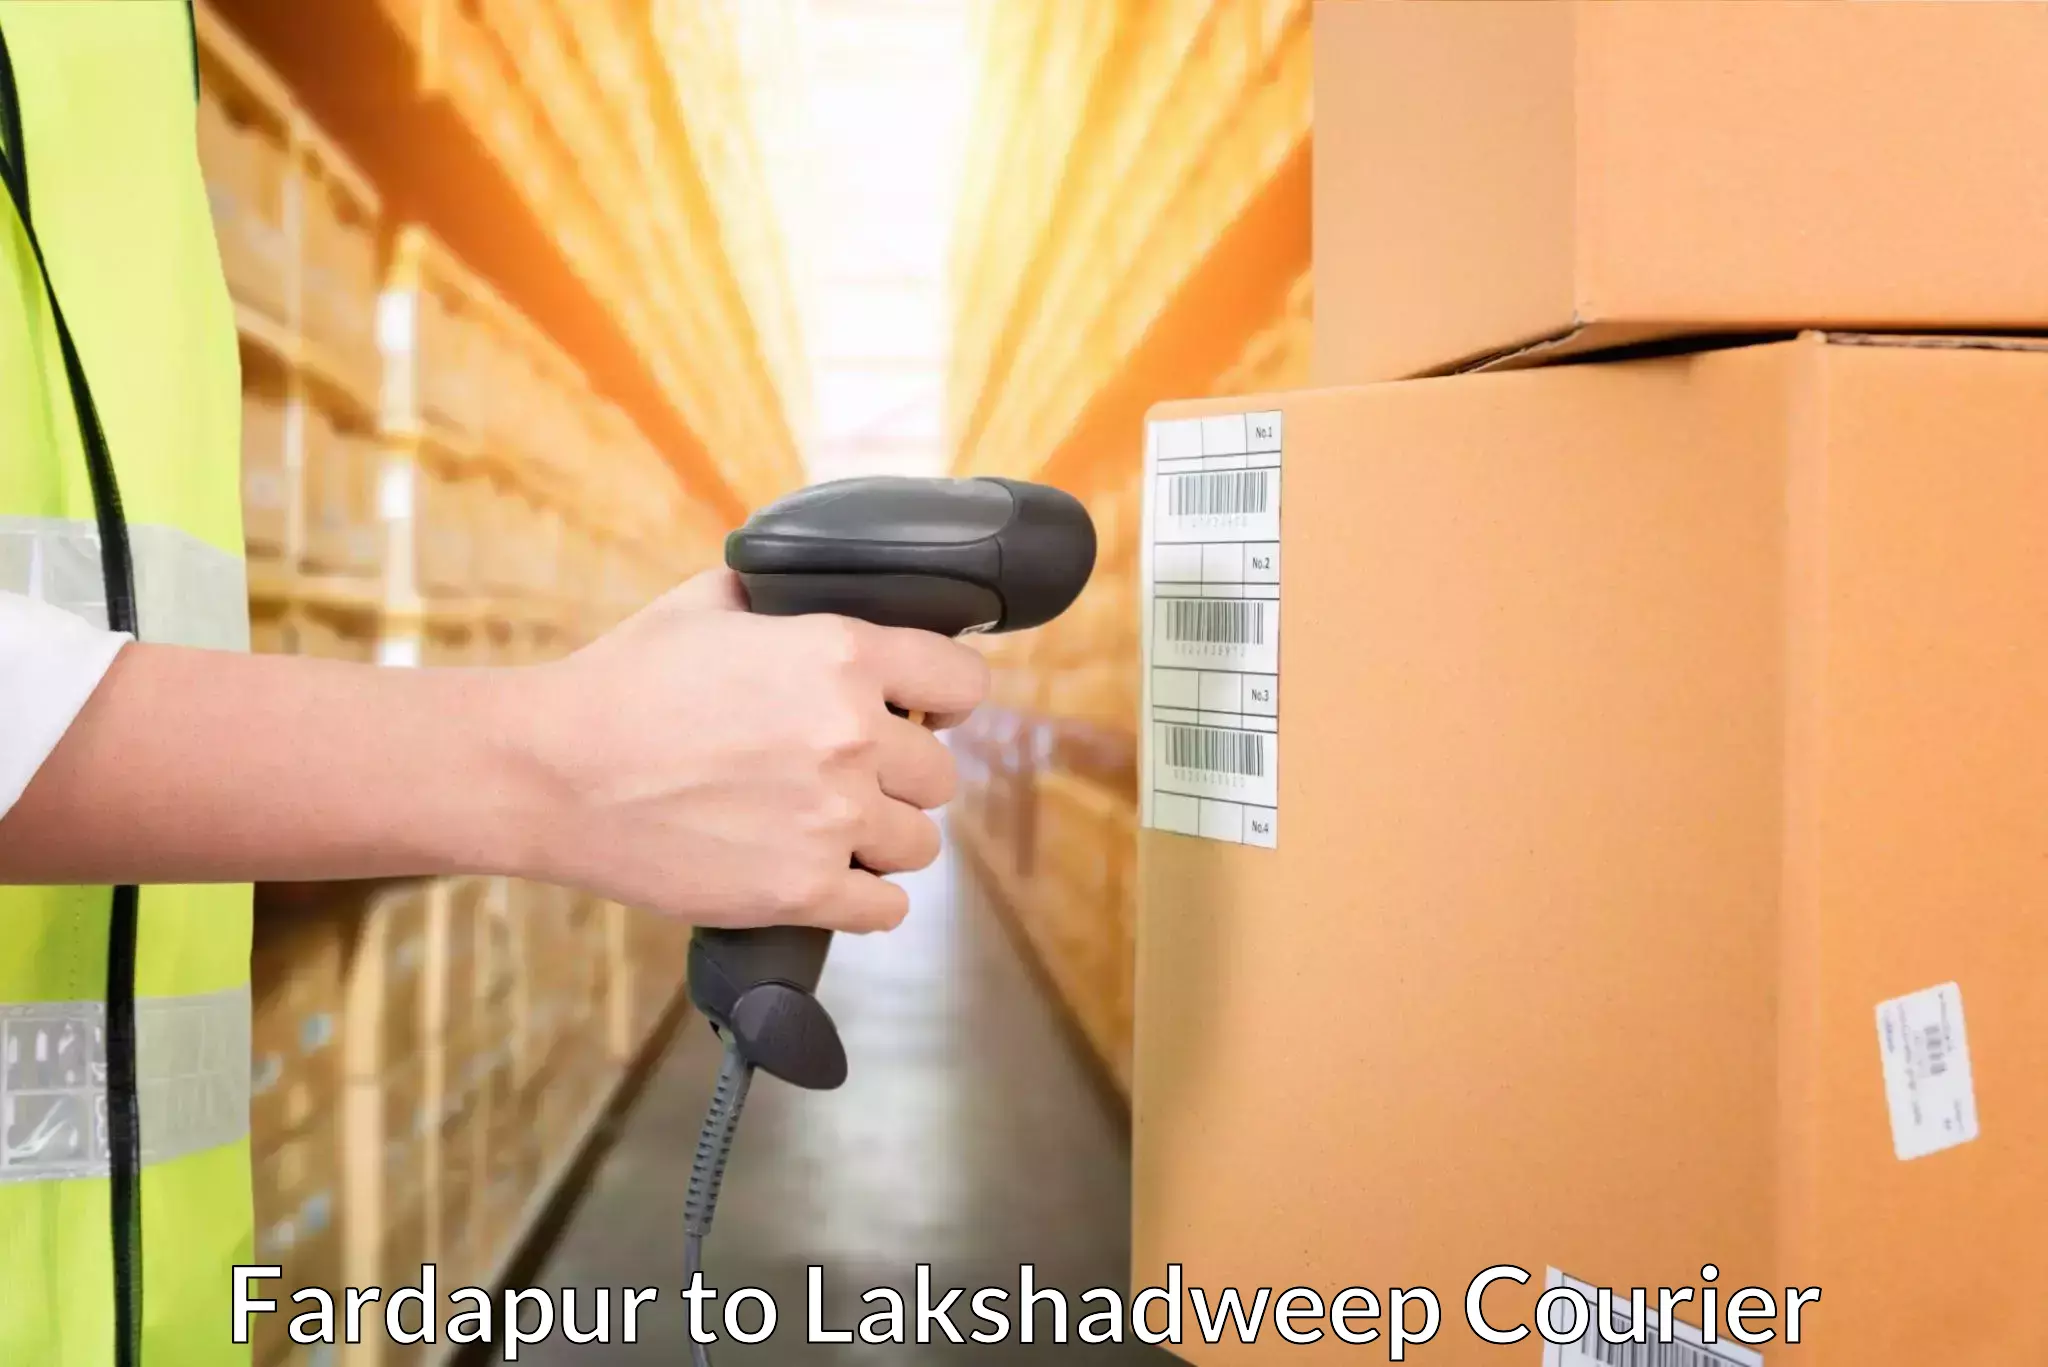 Modern delivery methods in Fardapur to Lakshadweep